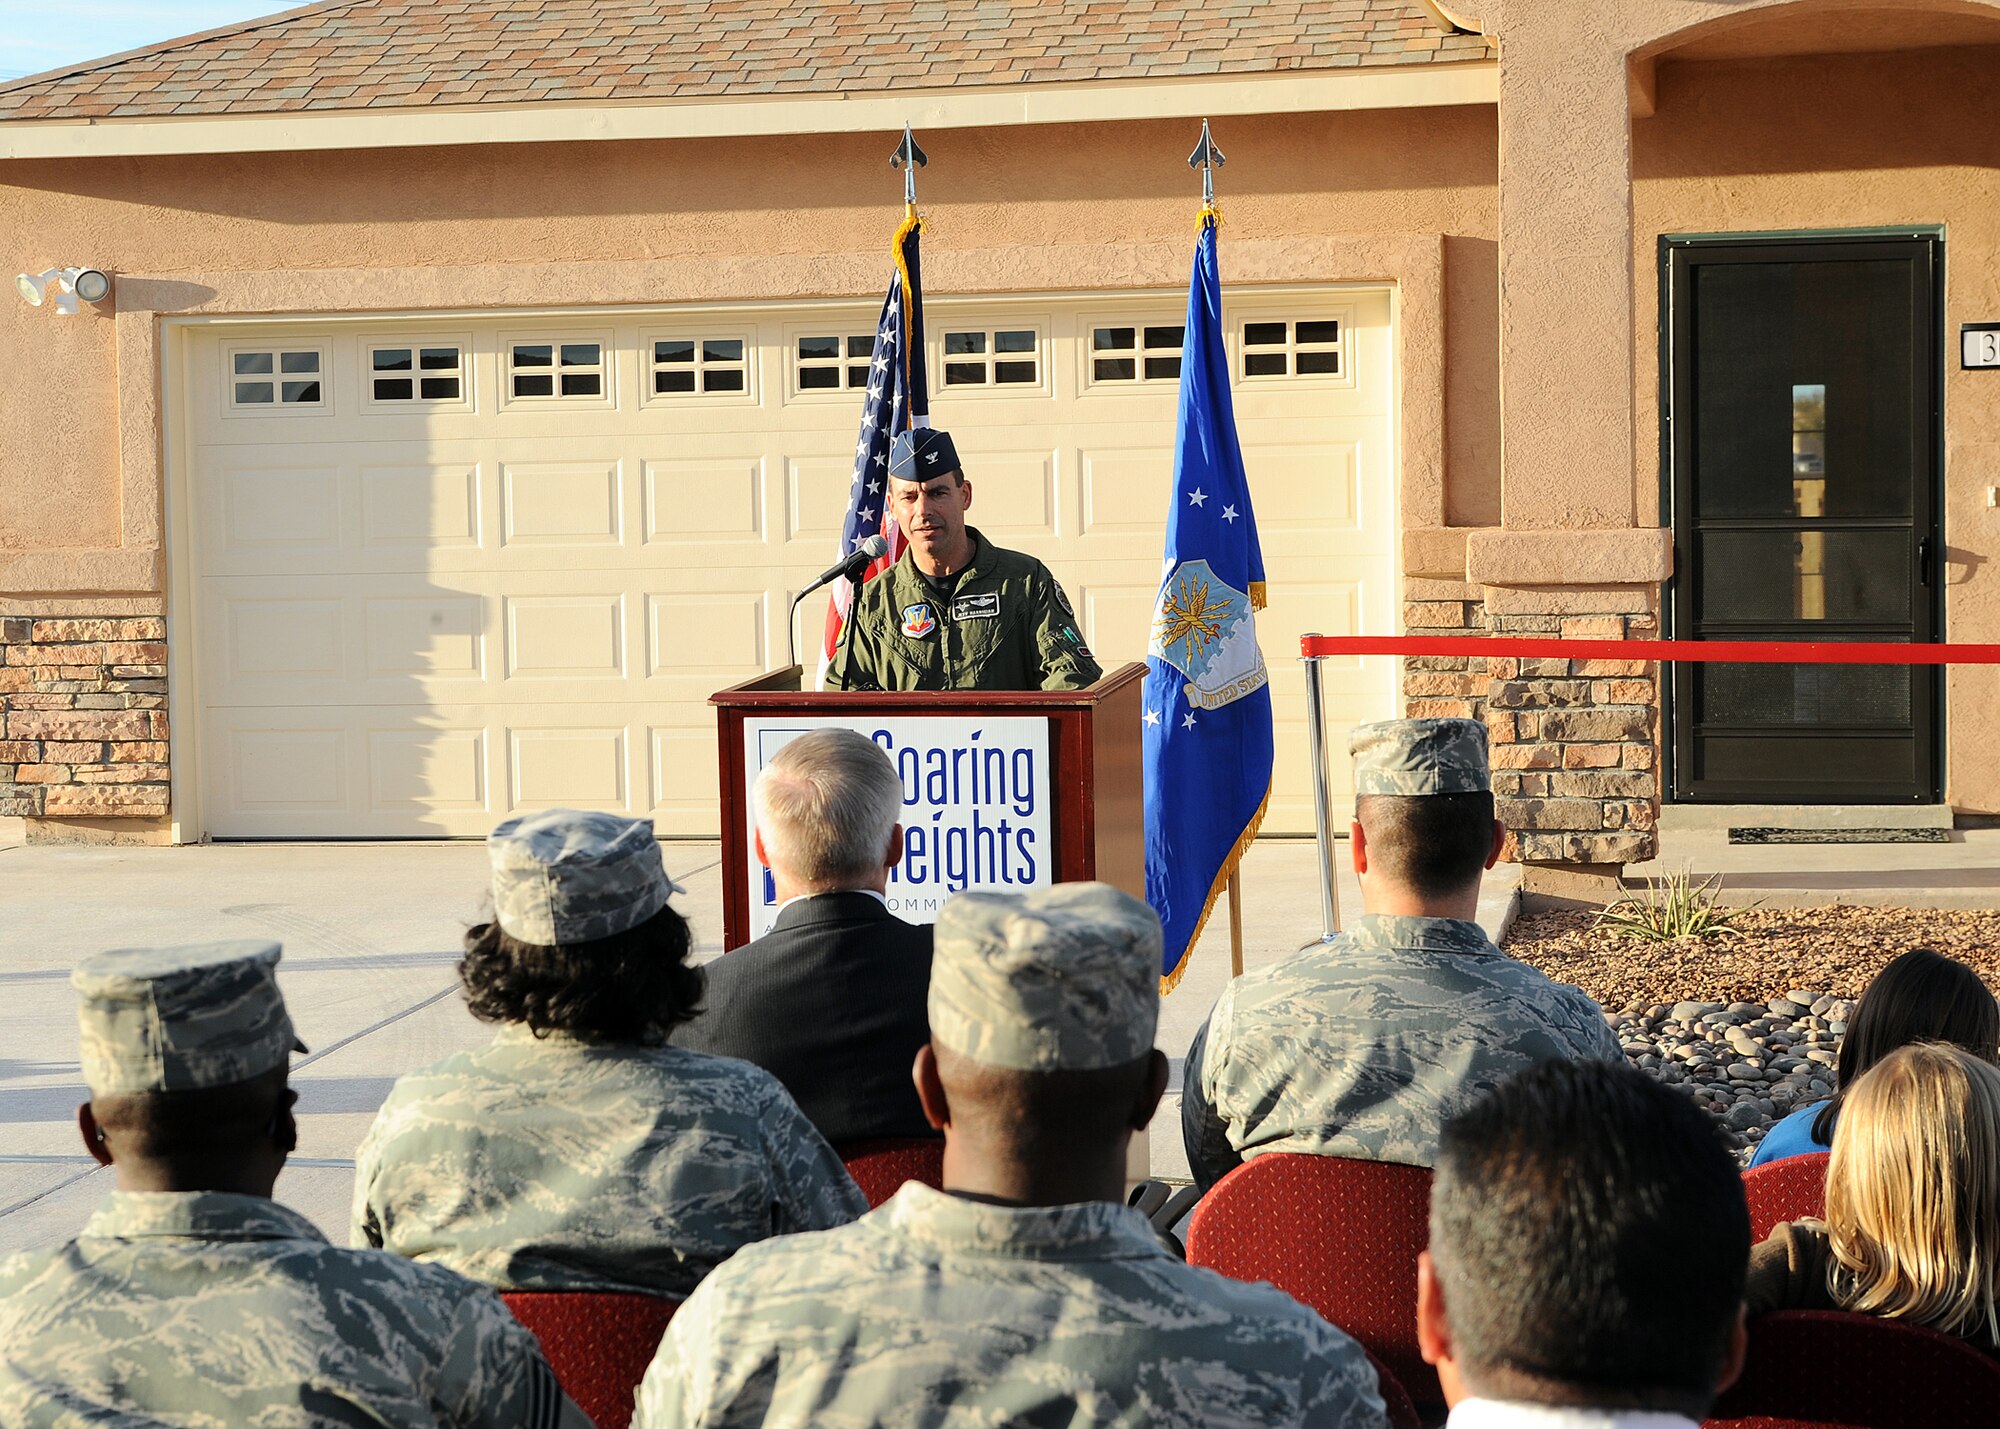 Col. Jeff Harrigian, 49th Fighter Wing commander, speaks at the Soaring Heights Communities ribbon cutting ceremony at Holloman Air Force Base, N.M., Jan. 8. The ceremony was to commemorate the first house opening on the new White Sands Drive.